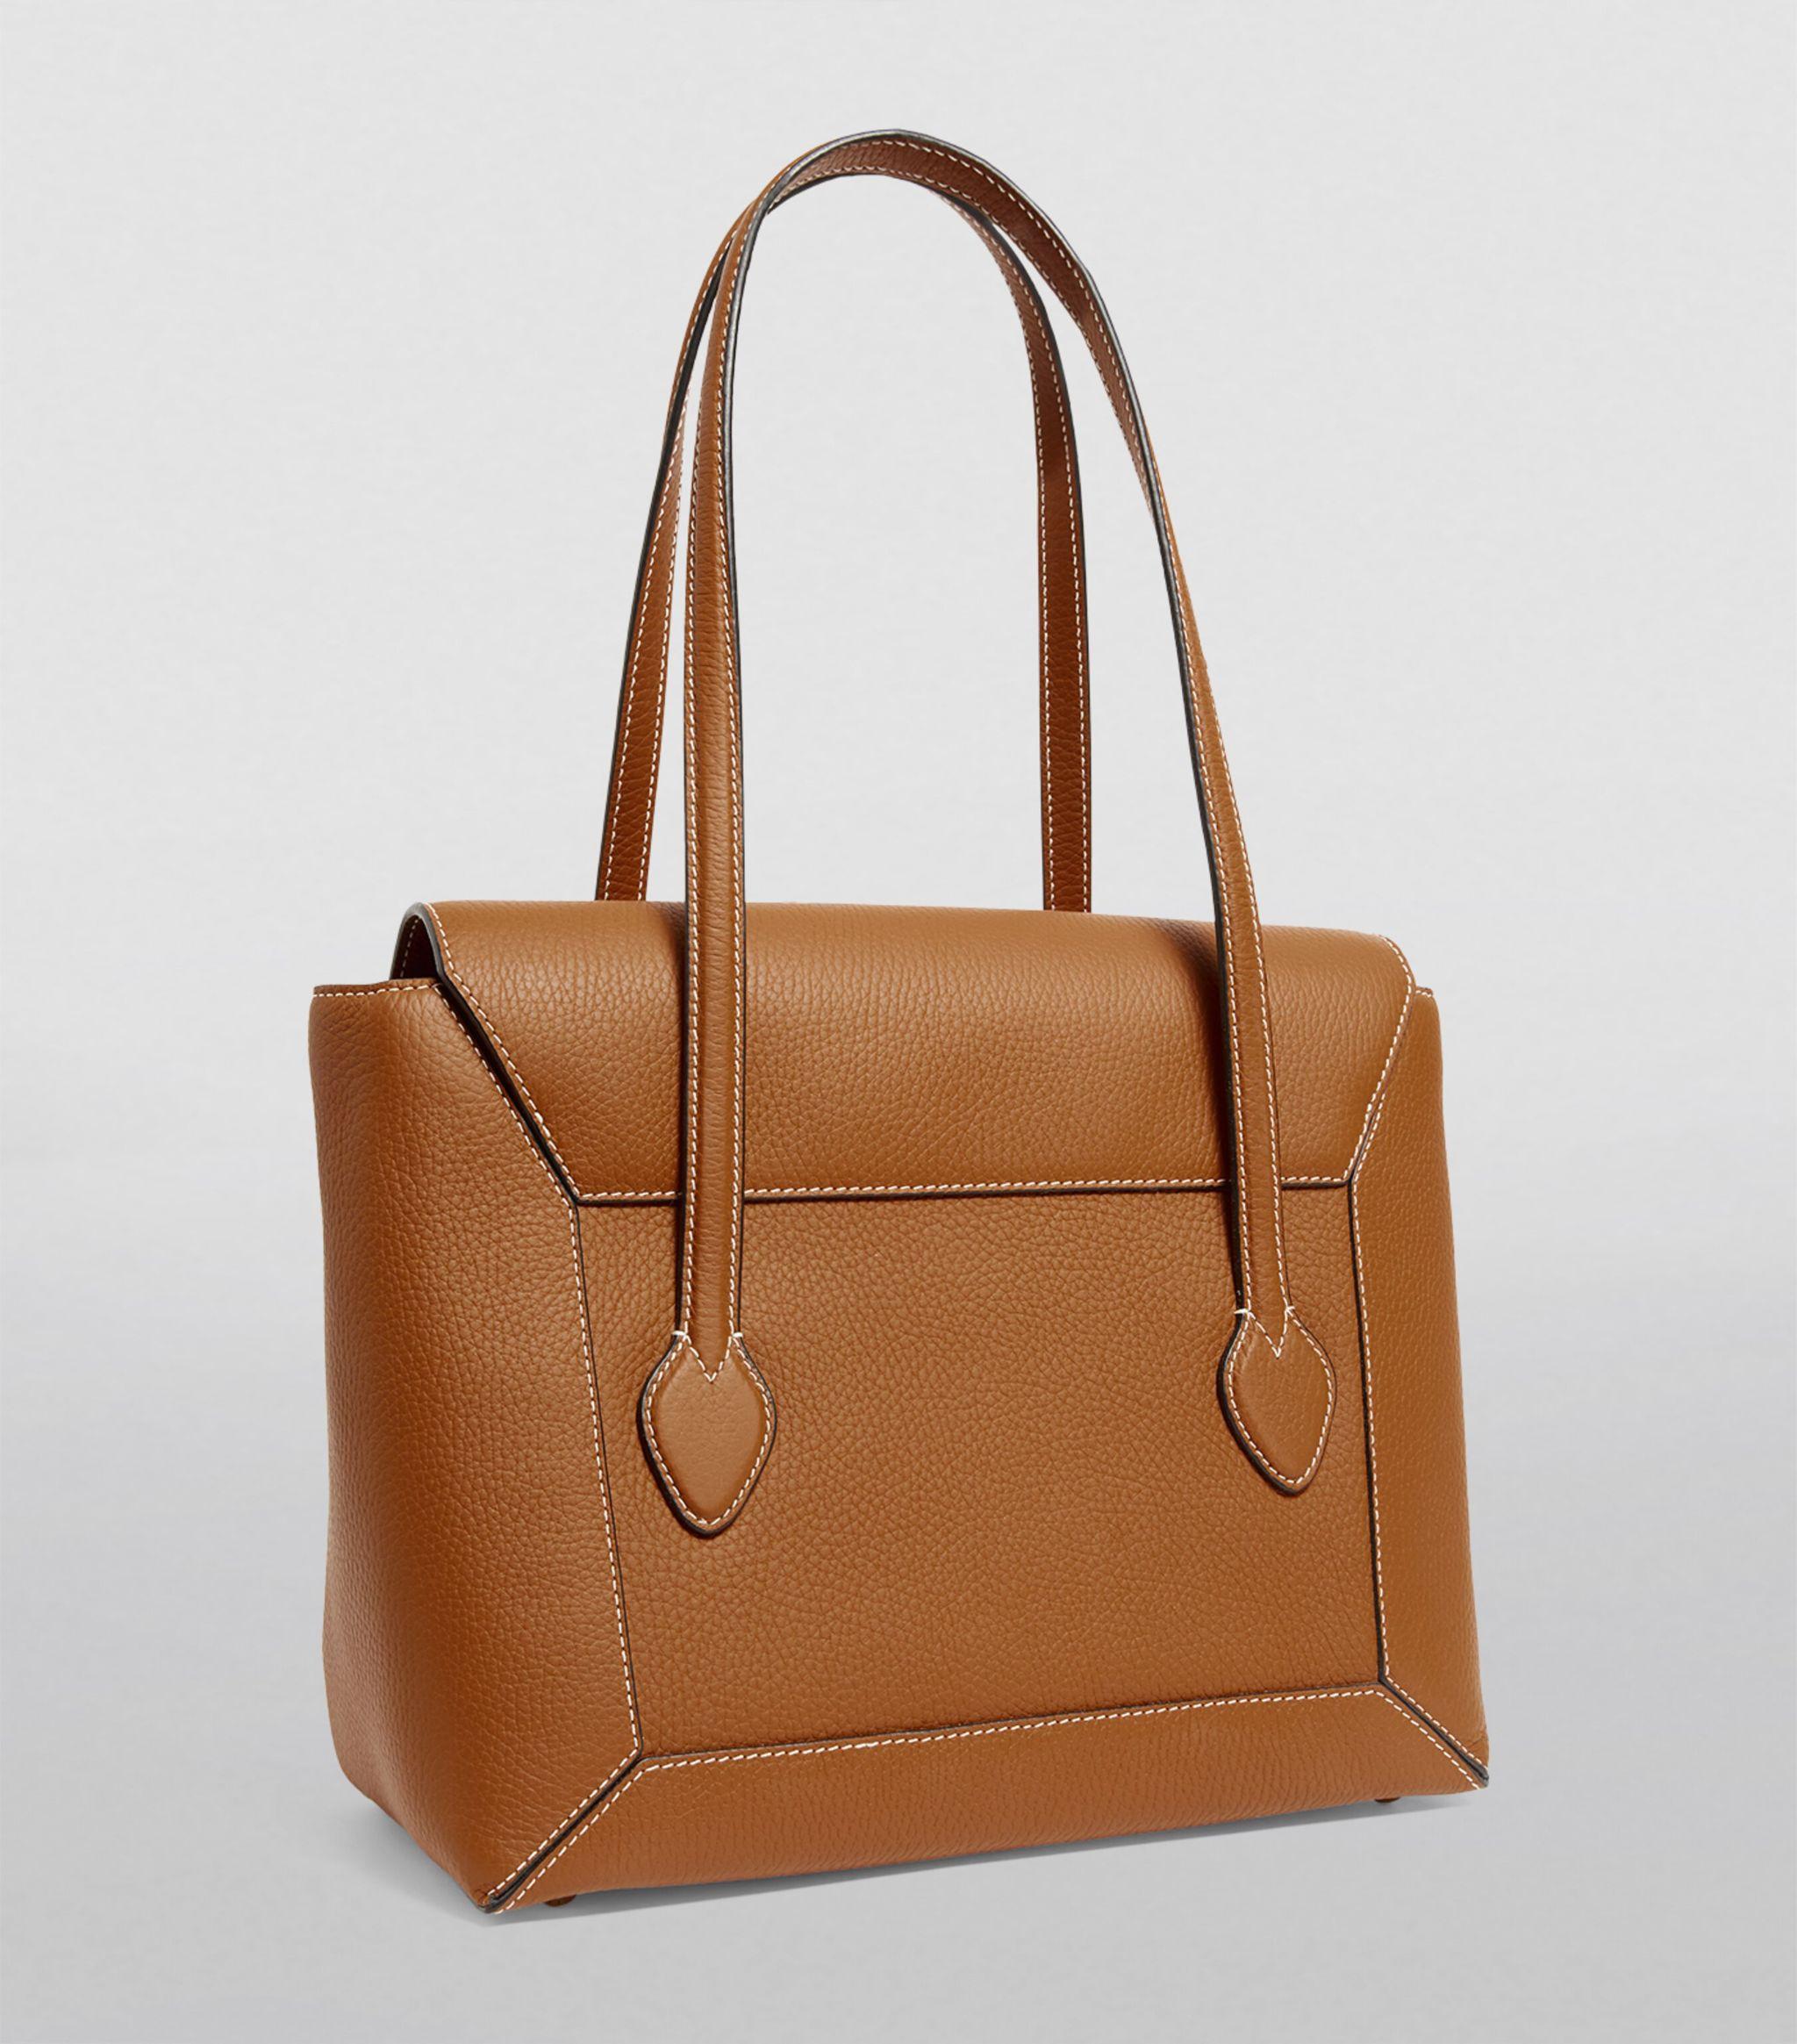 Strathberry Mosaic Leather Shopper Tote